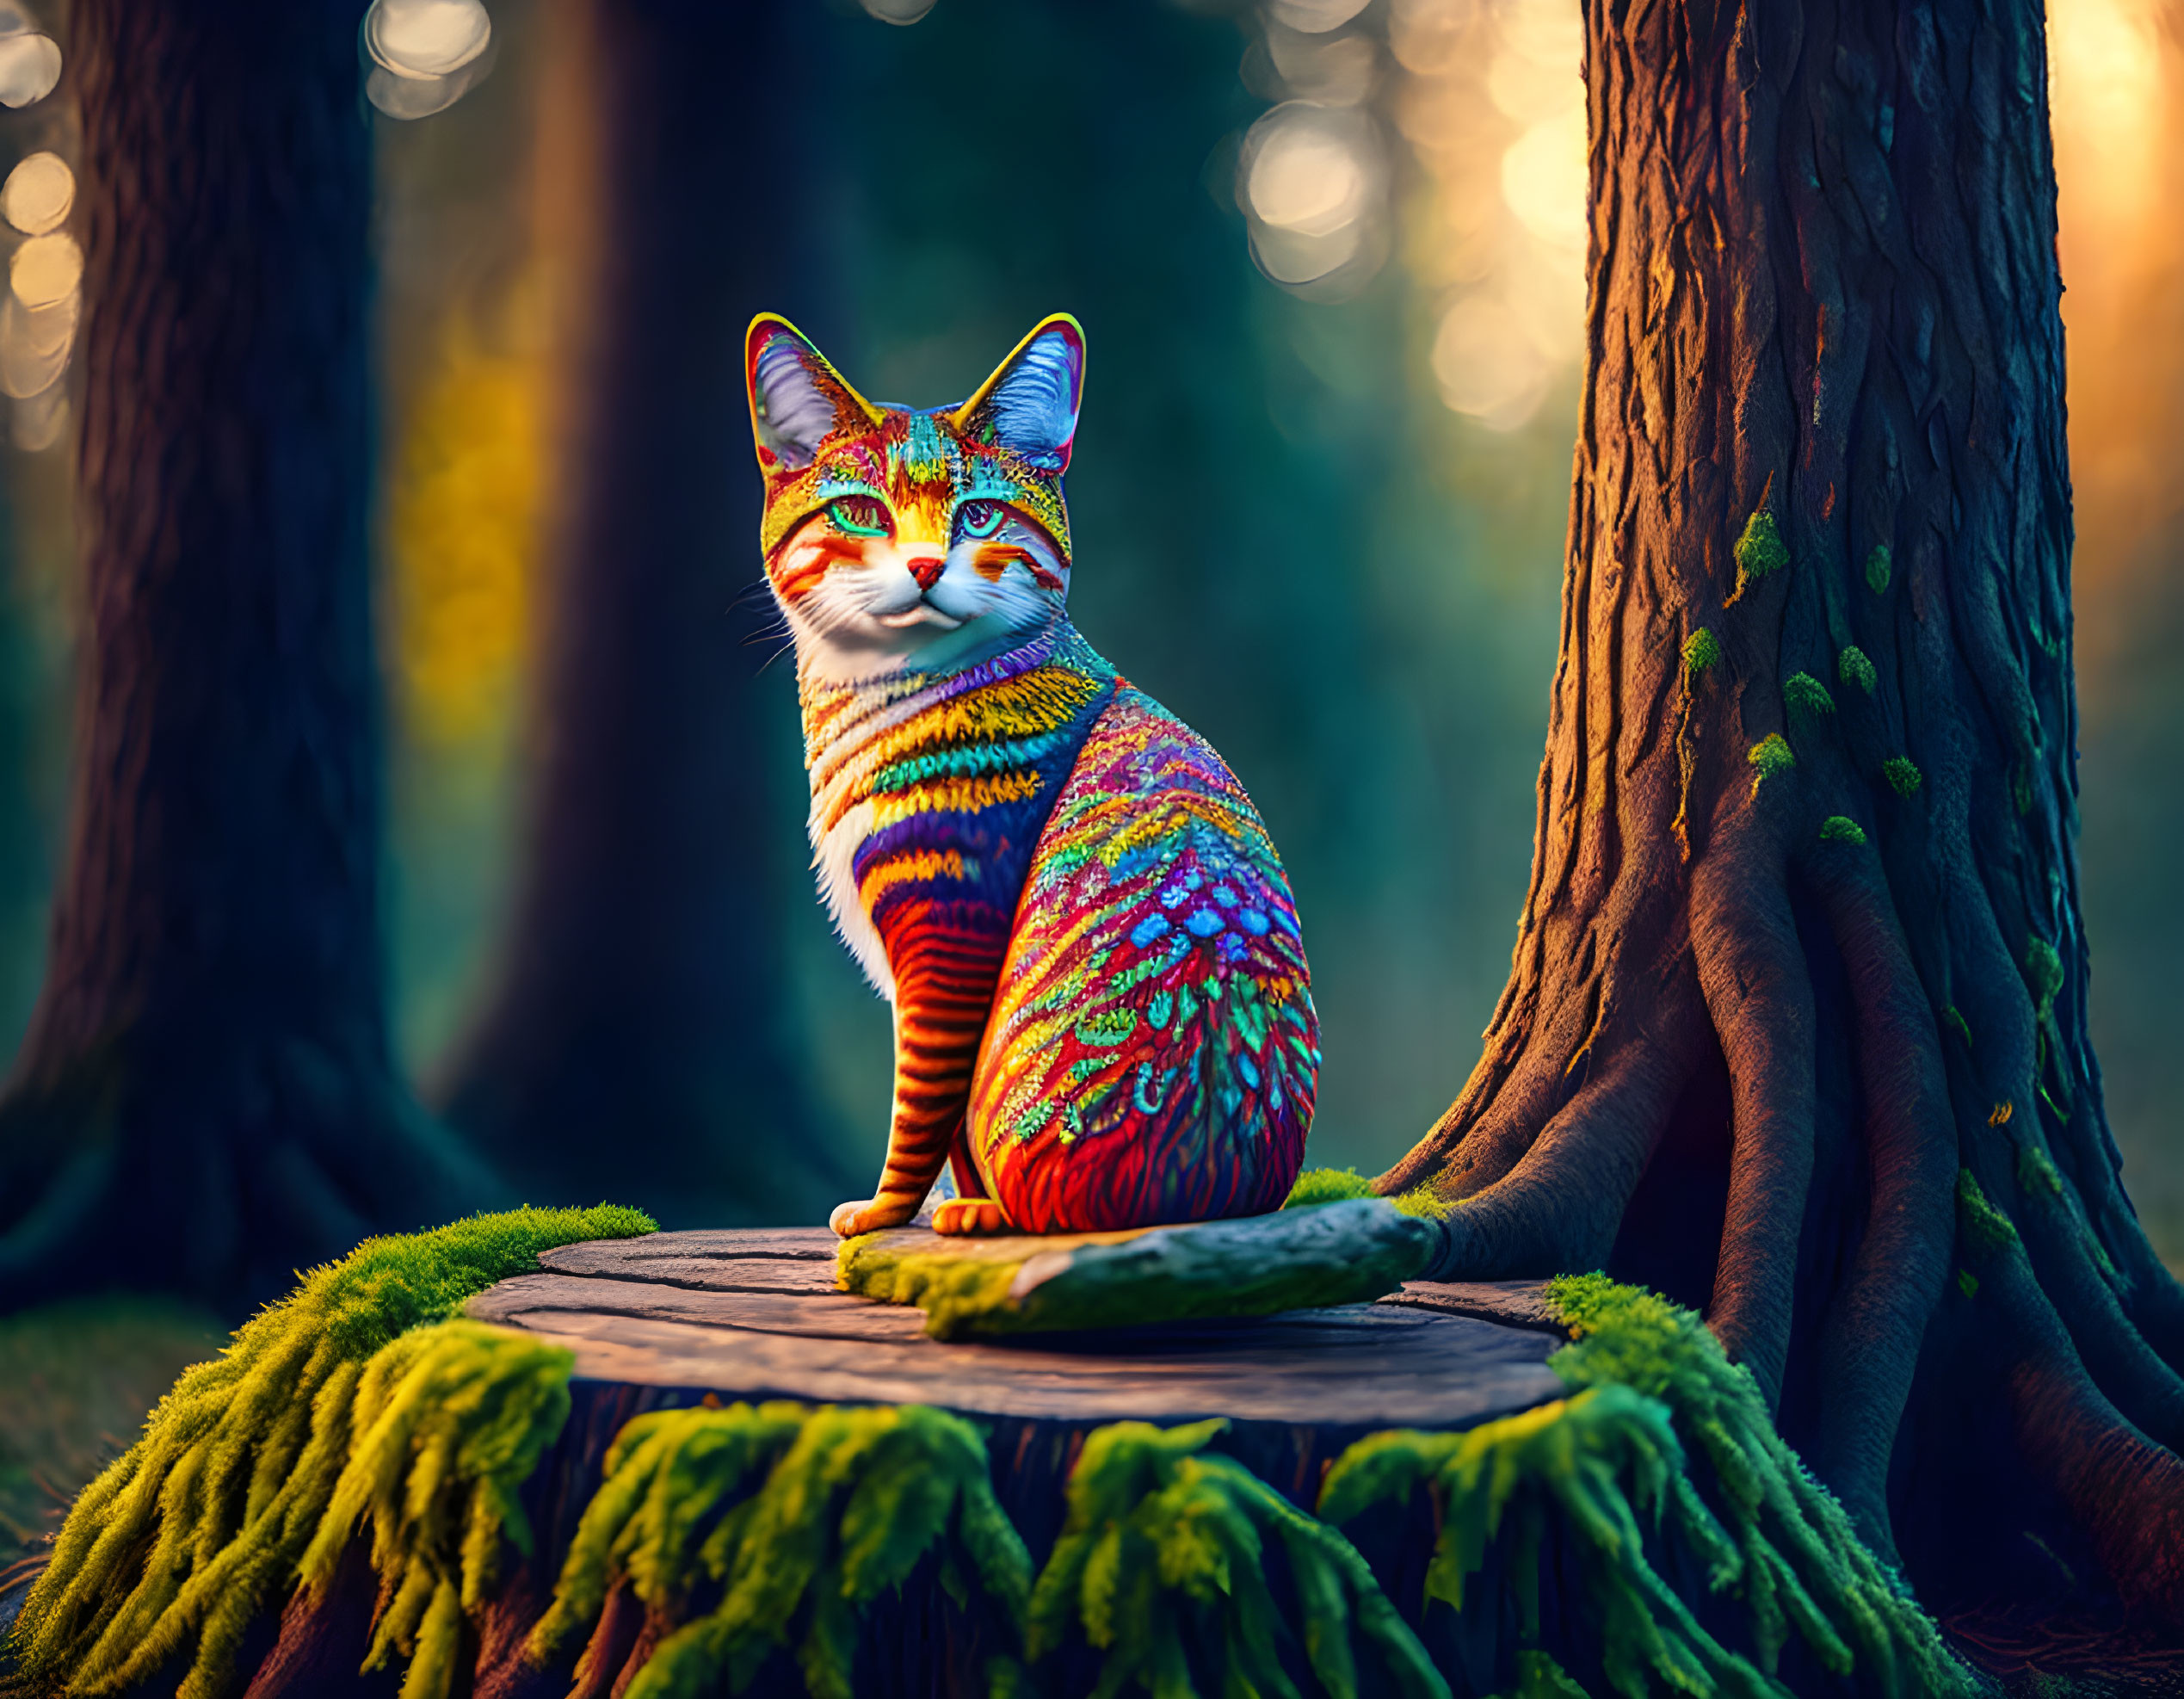 Colorful Patterned Cat Resting on Mossy Stump in Sunlit Forest